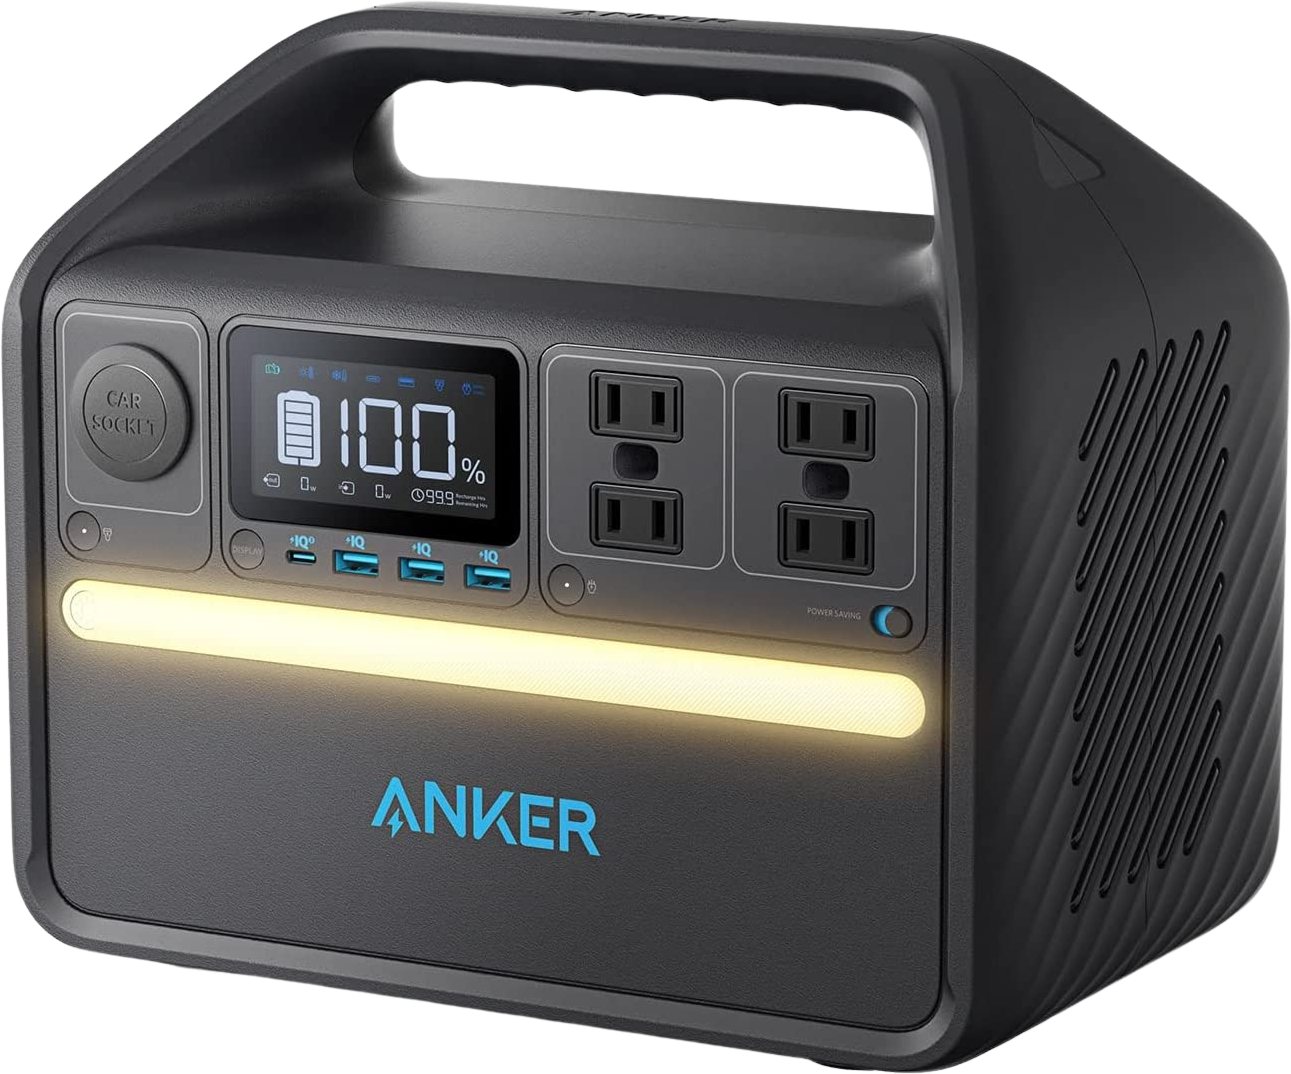 Anker 535 512WH/500W PowerHouse Portable Power Station Manufacturer RFB